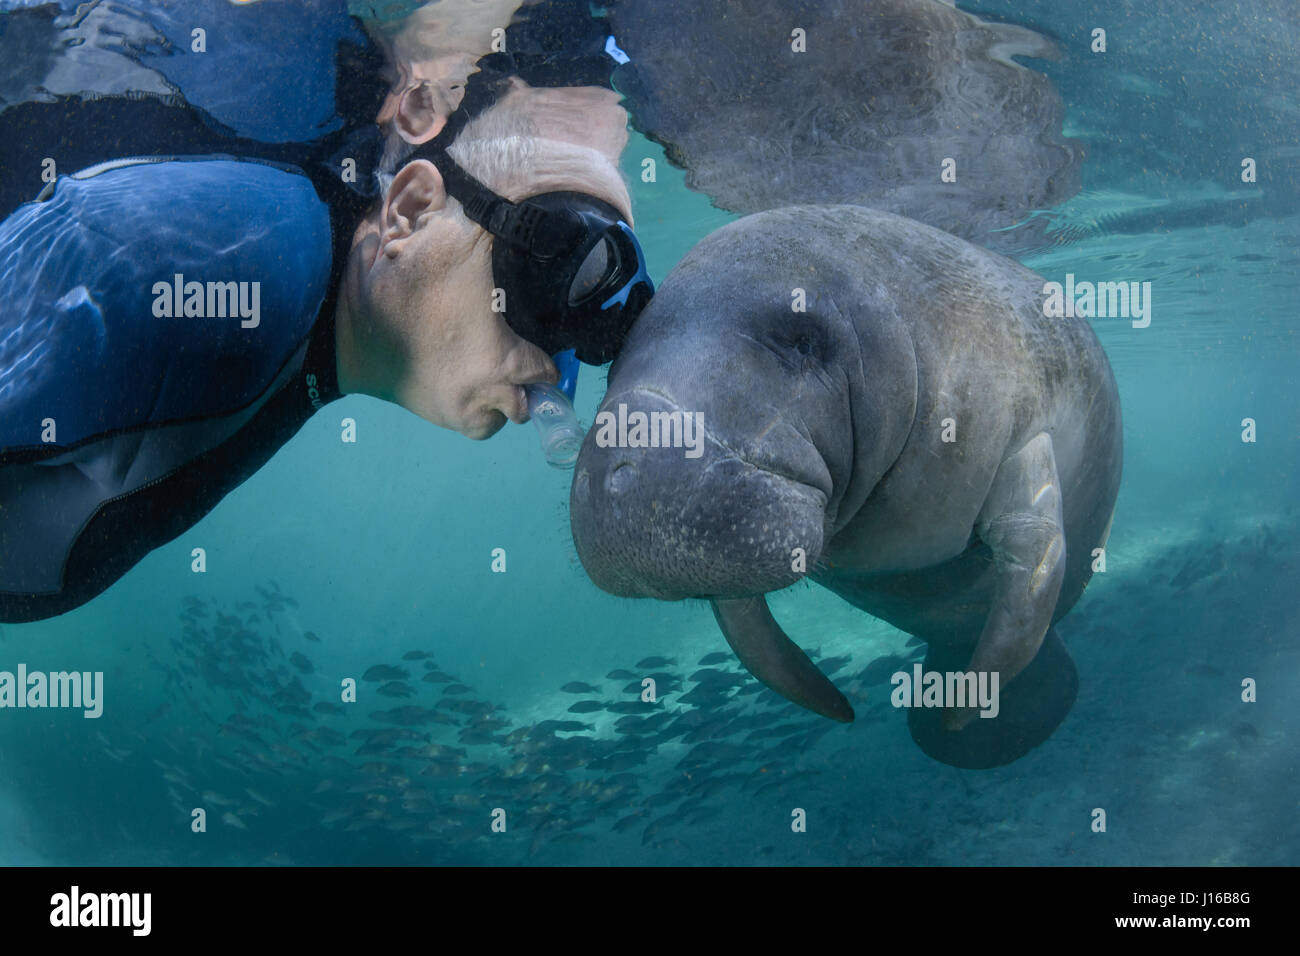 CRYSTAL RIVER, FLORIDA: husband Theo Grant is a manatee magnet. This female manatee seemed to be  communicating some secret to him.  WILD half-ton manatees are so in love with their human pals that they cannot resist touching, kissing and posing for selfies with them. A particular “manatee magnet” is Theo Grant who attracts the curious marine mammals – nicknamed sea cows – by pretending to be manatees. This means floating in the water and moving slowly just like one of the gentle giants. Theo is so successful at this that several of the lady manatees are in love with him, according to his wife Stock Photo